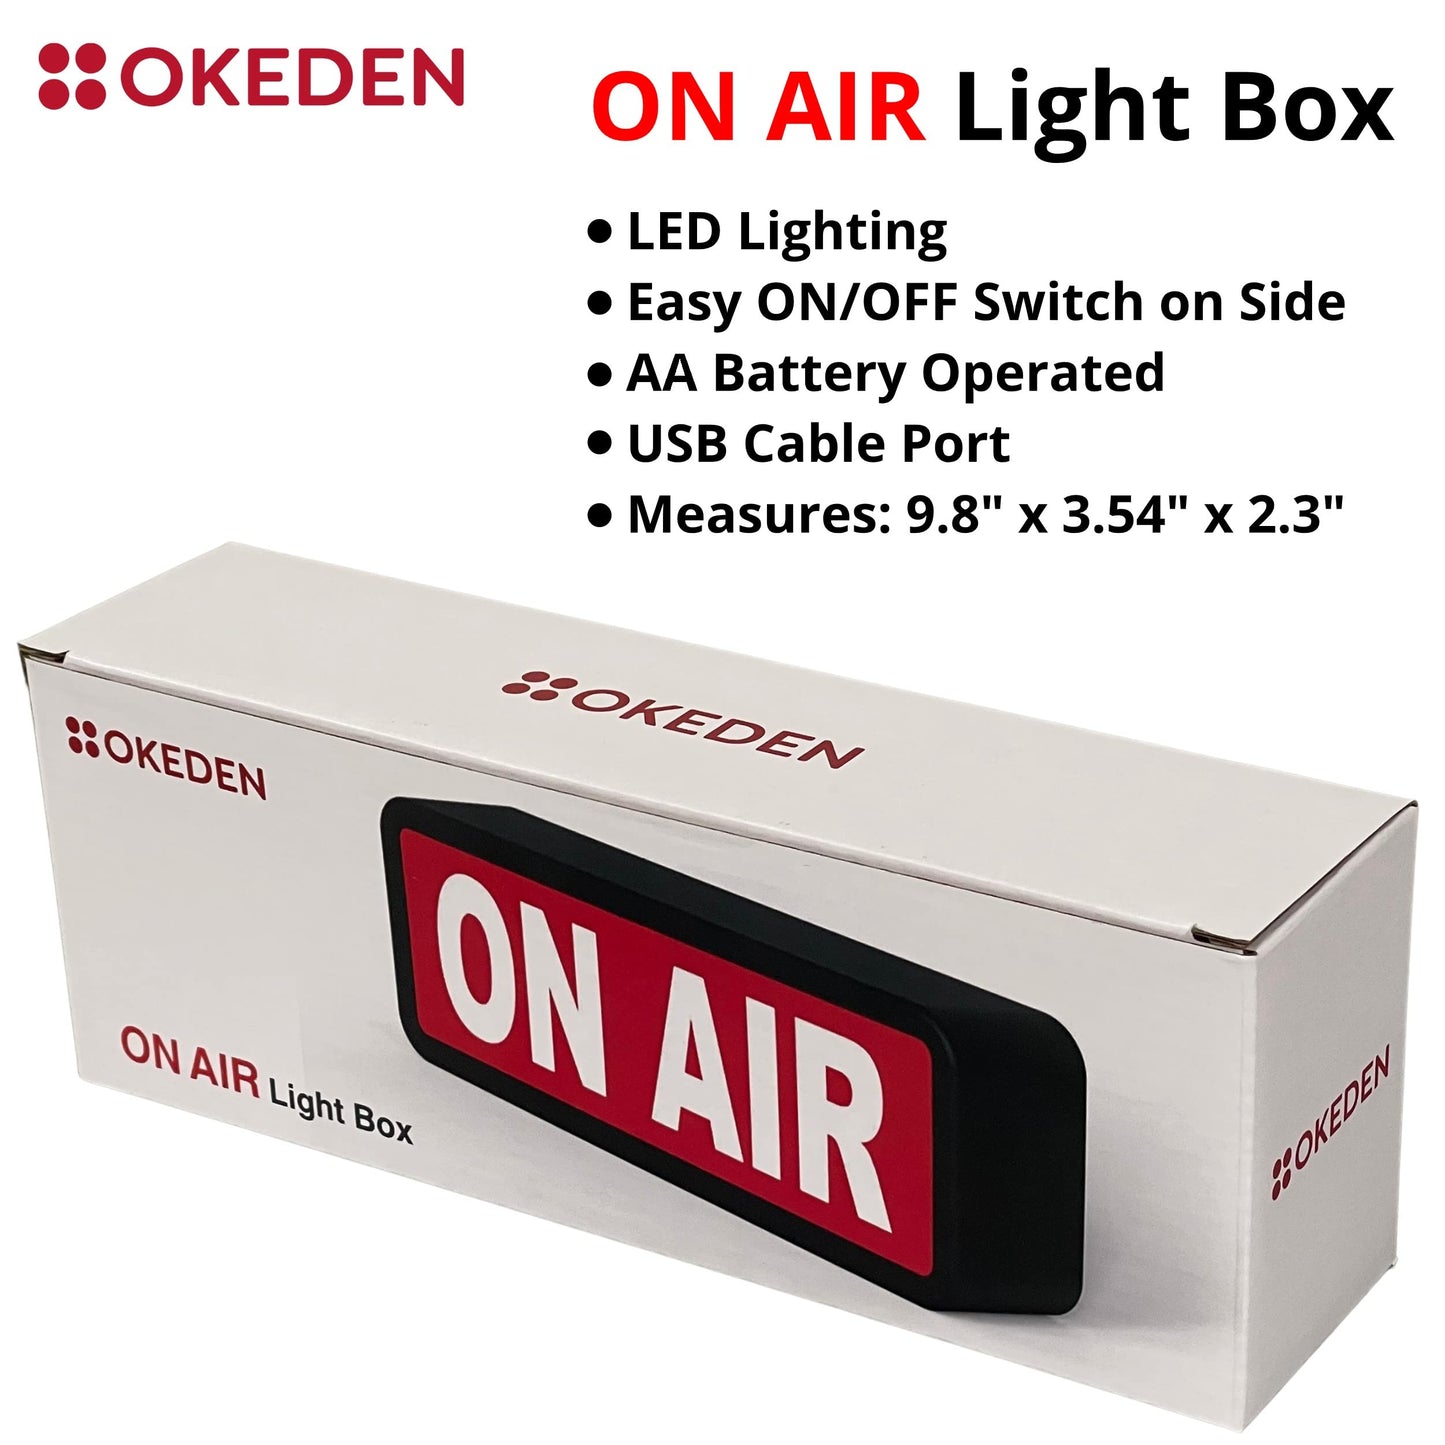 ON AIR LIGHT LED Sign by OKEDEN - Room Decor Wall Decor Light Sign Recording Sign for Vloggers, Youtube Stars, Home Studio, Desk, or Just Cool - Easy ON/OFF Switch and Operates on AA Batteries or USB Power